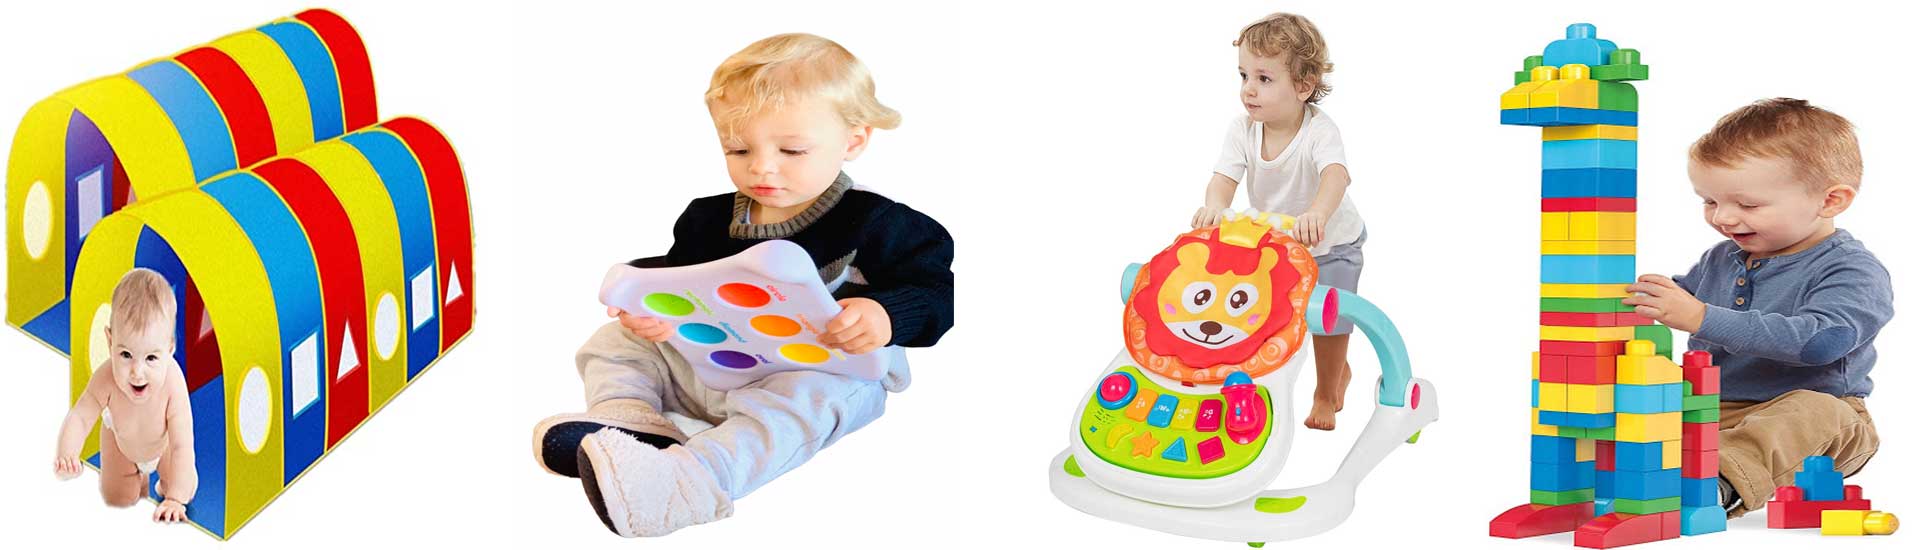 brain development toys for 1 year old